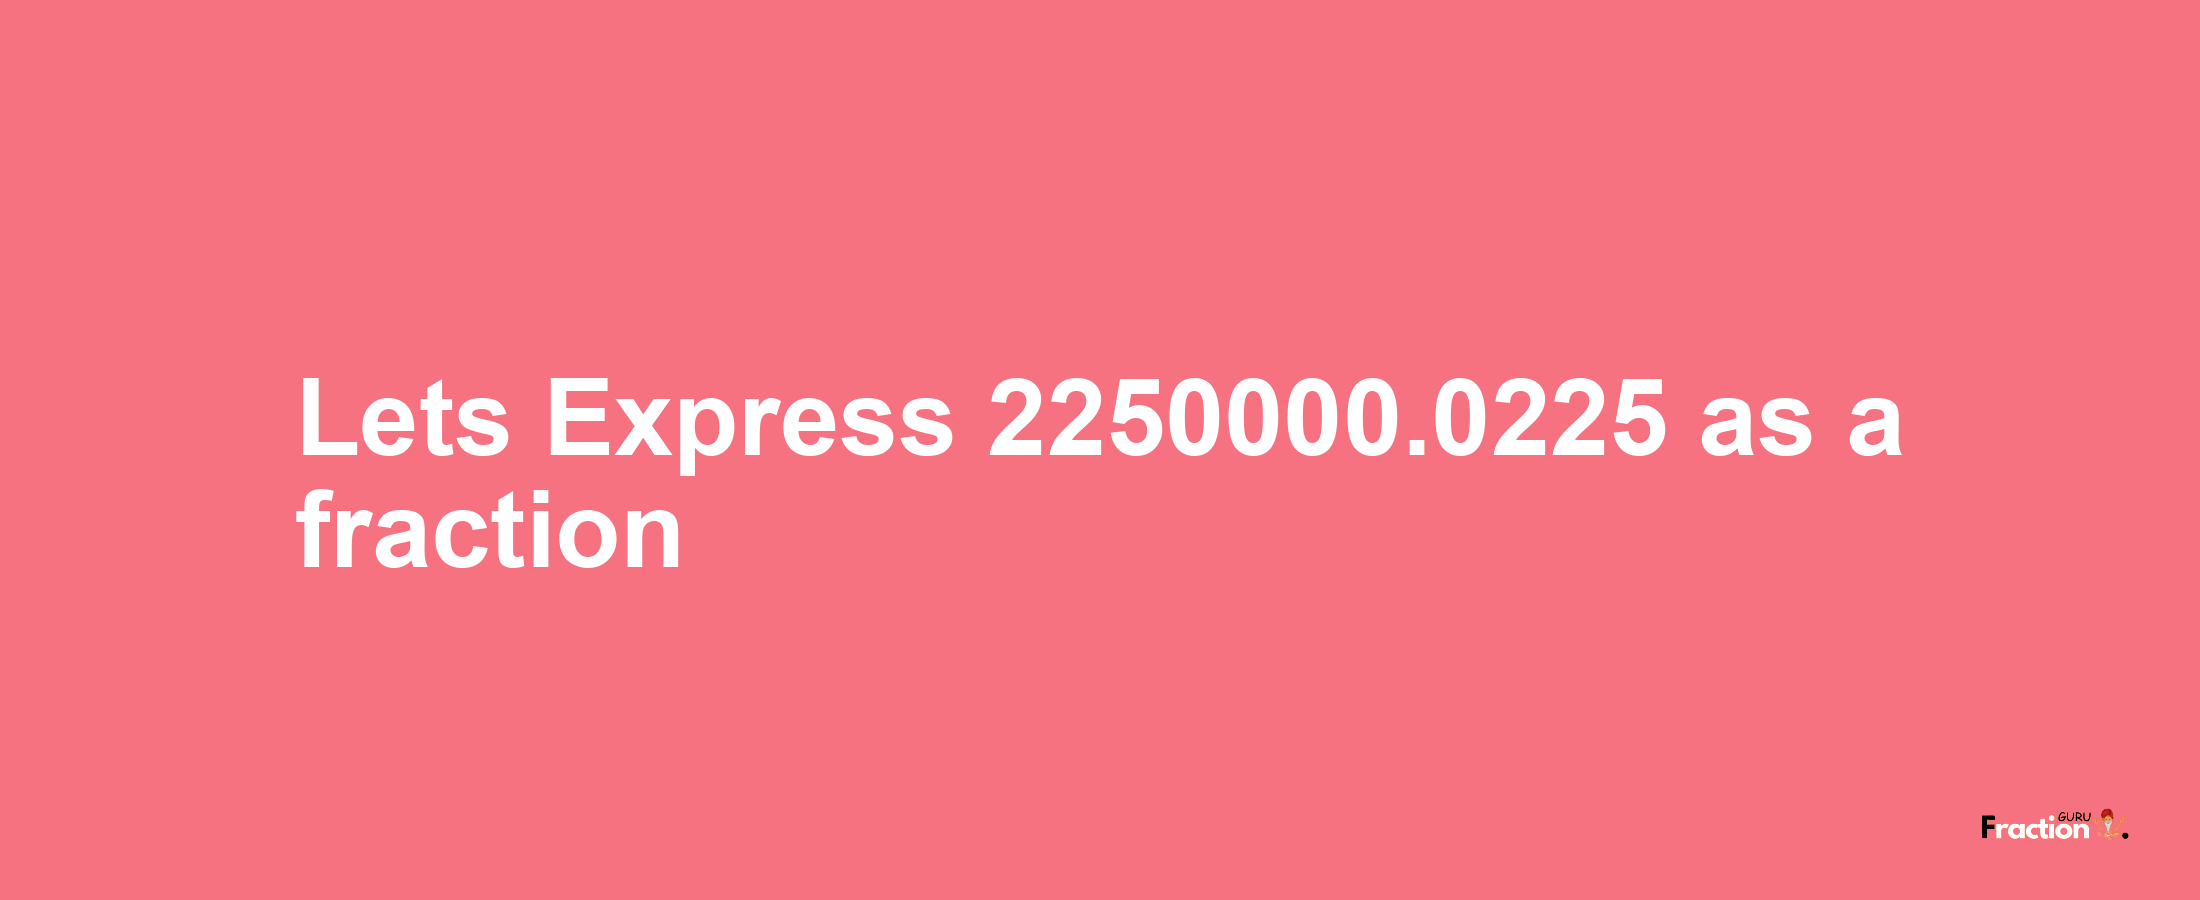 Lets Express 2250000.0225 as afraction